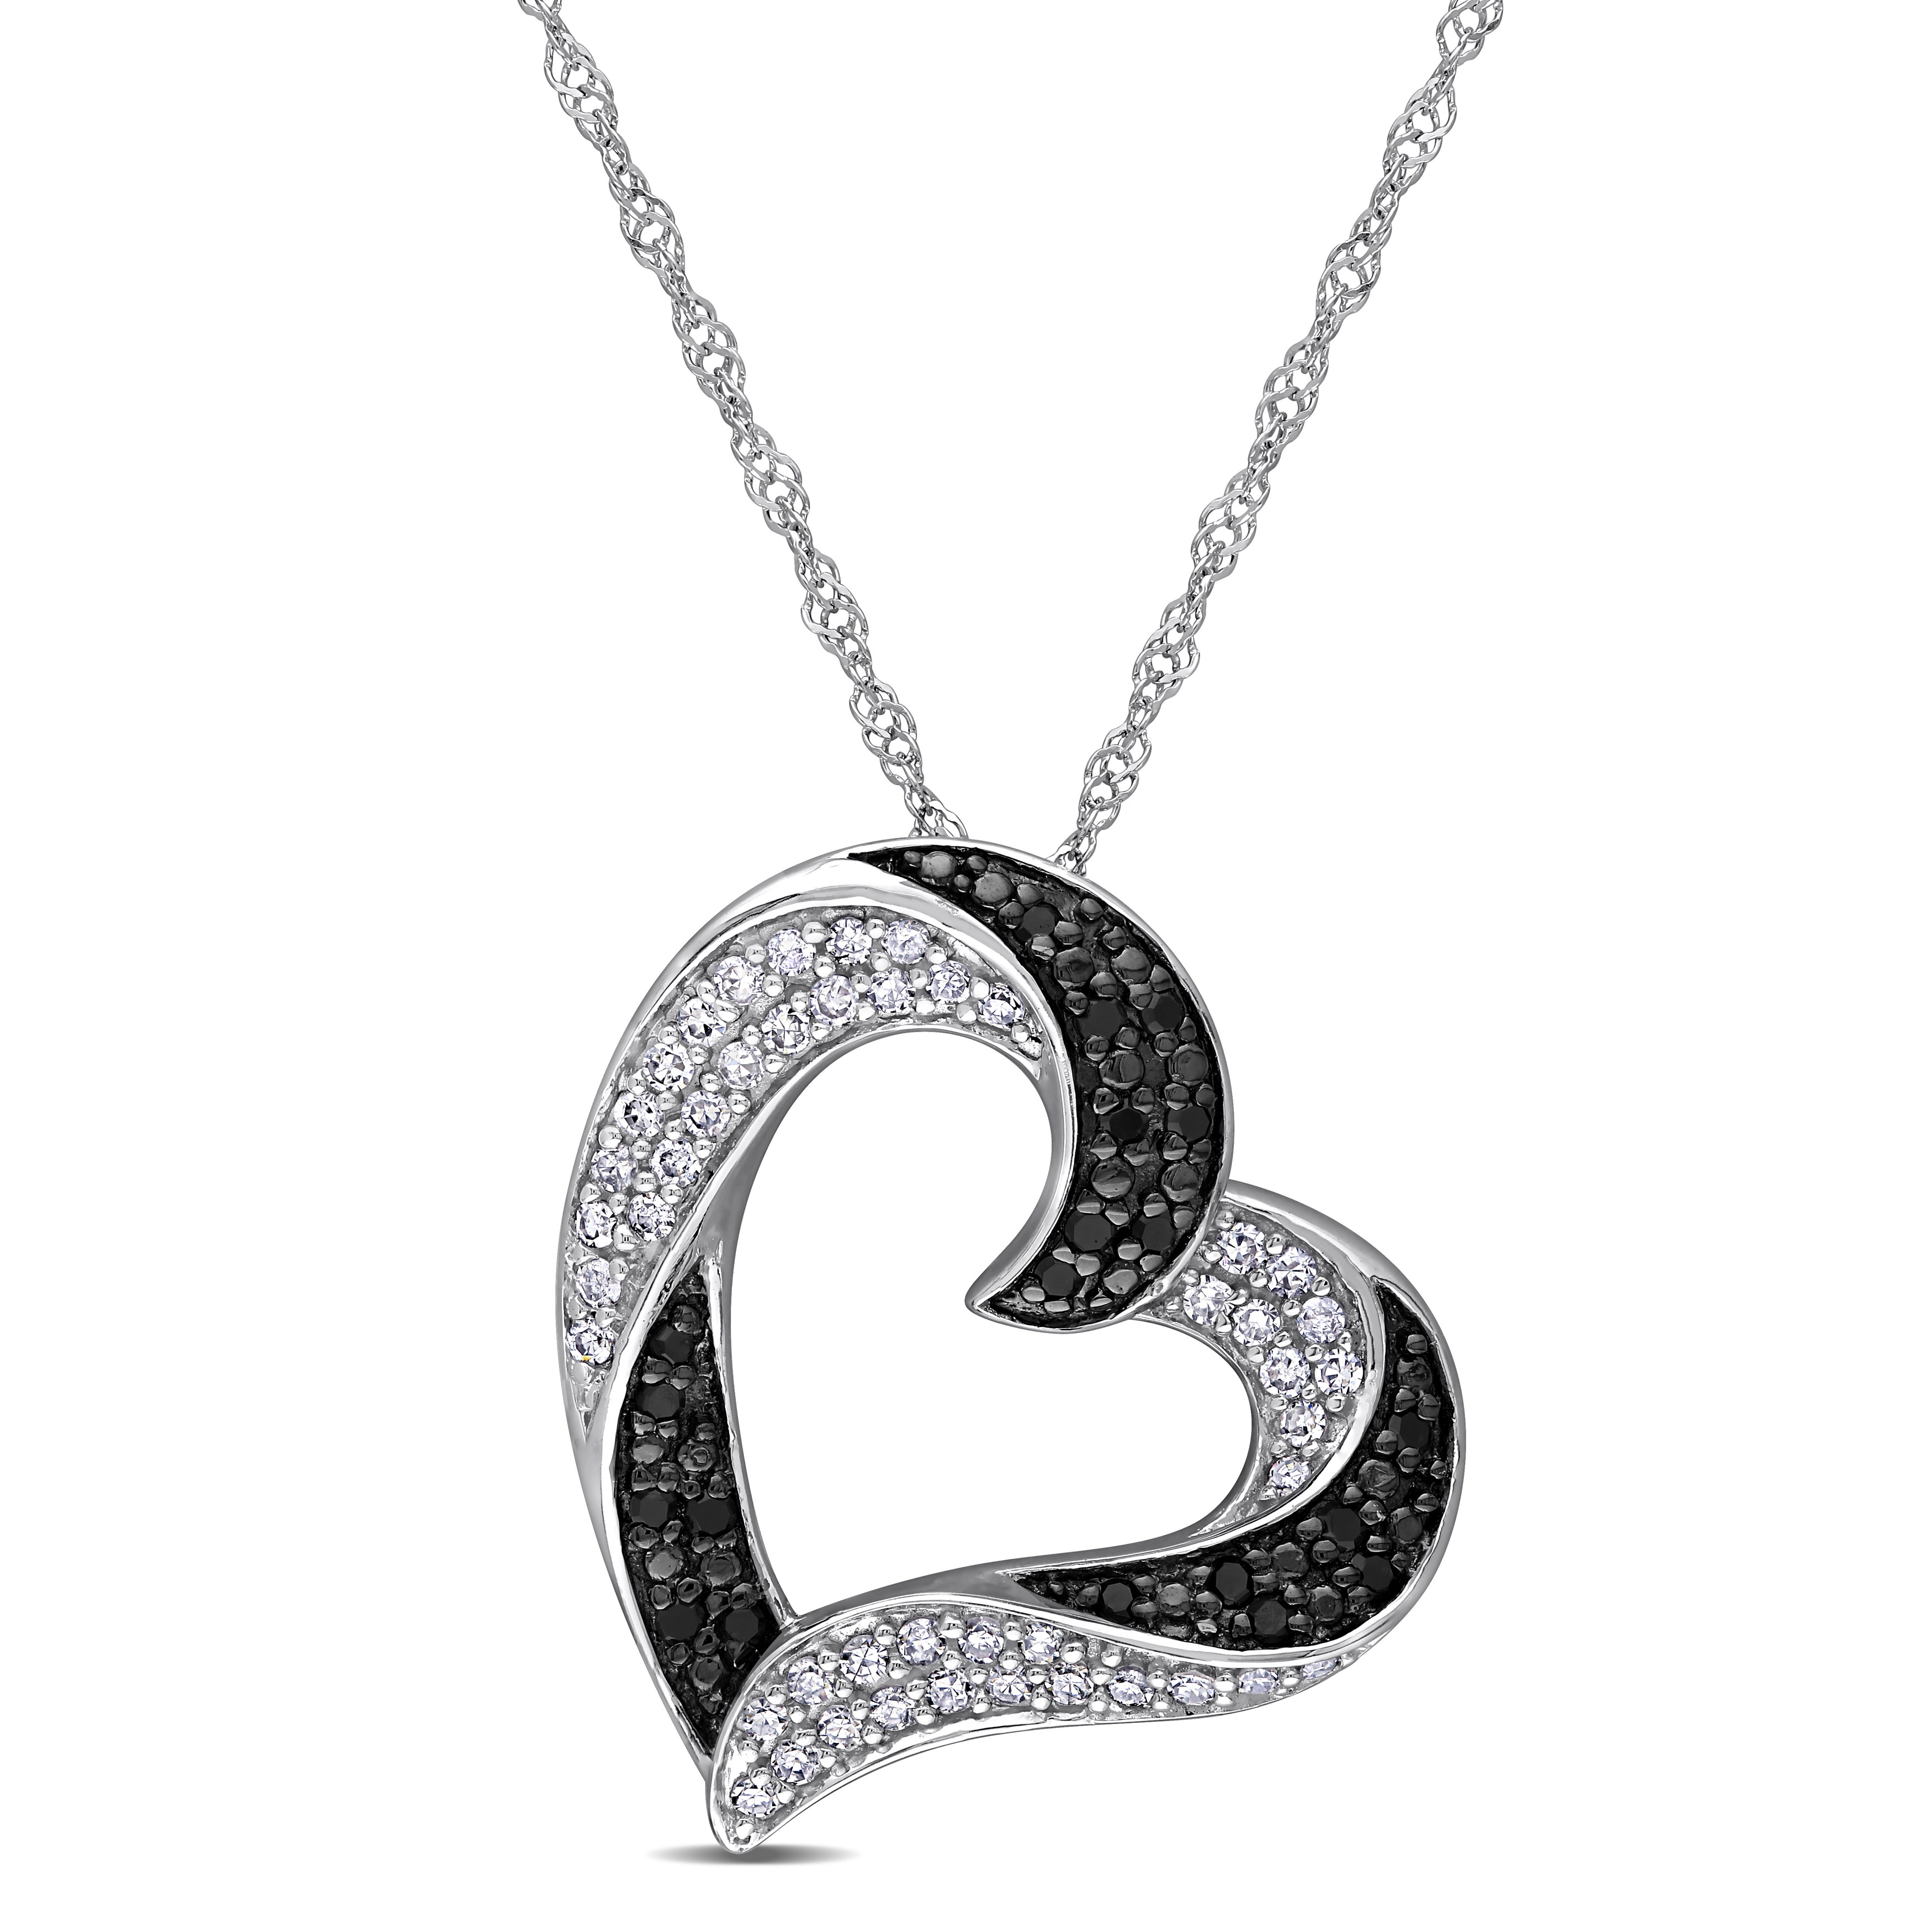 1/3 CT TW Black and White Diamond Heart Pendant with Chain in 10k White Gold with Black Rhodium